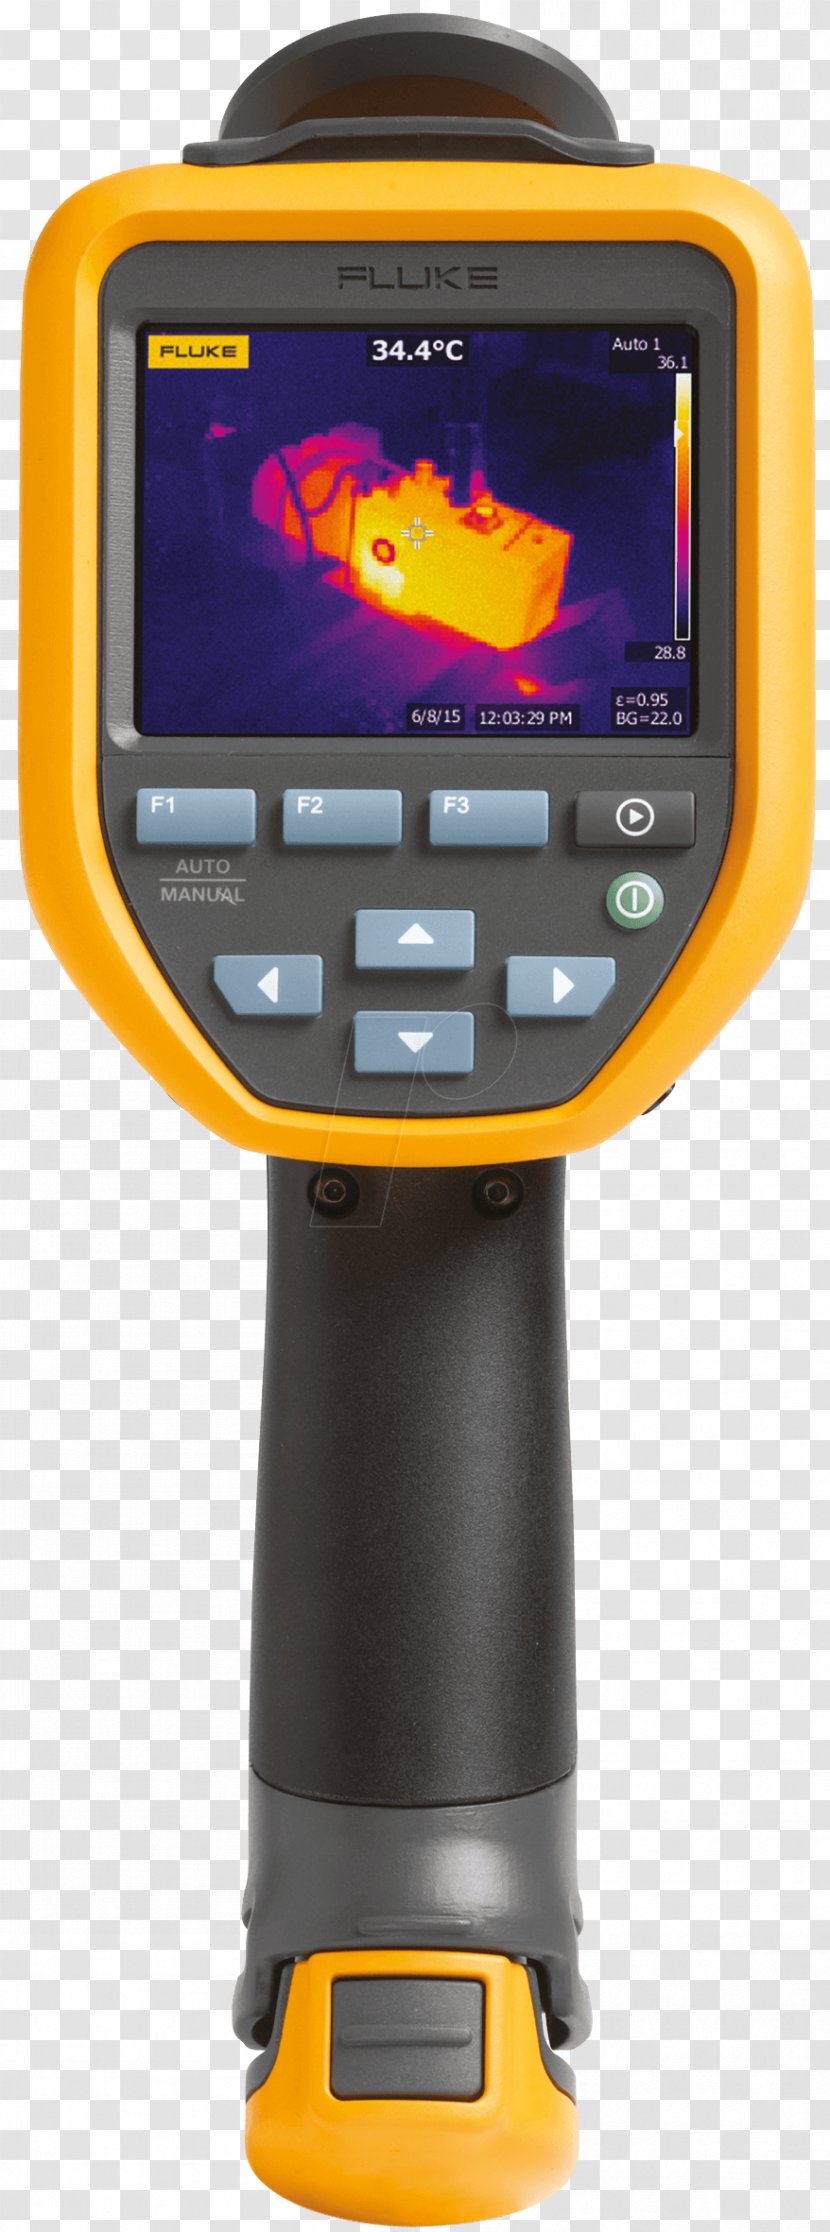 Fluke Corporation Thermographic Camera Thermal Imaging Technologies Pvt. Ltd. Transparent PNG